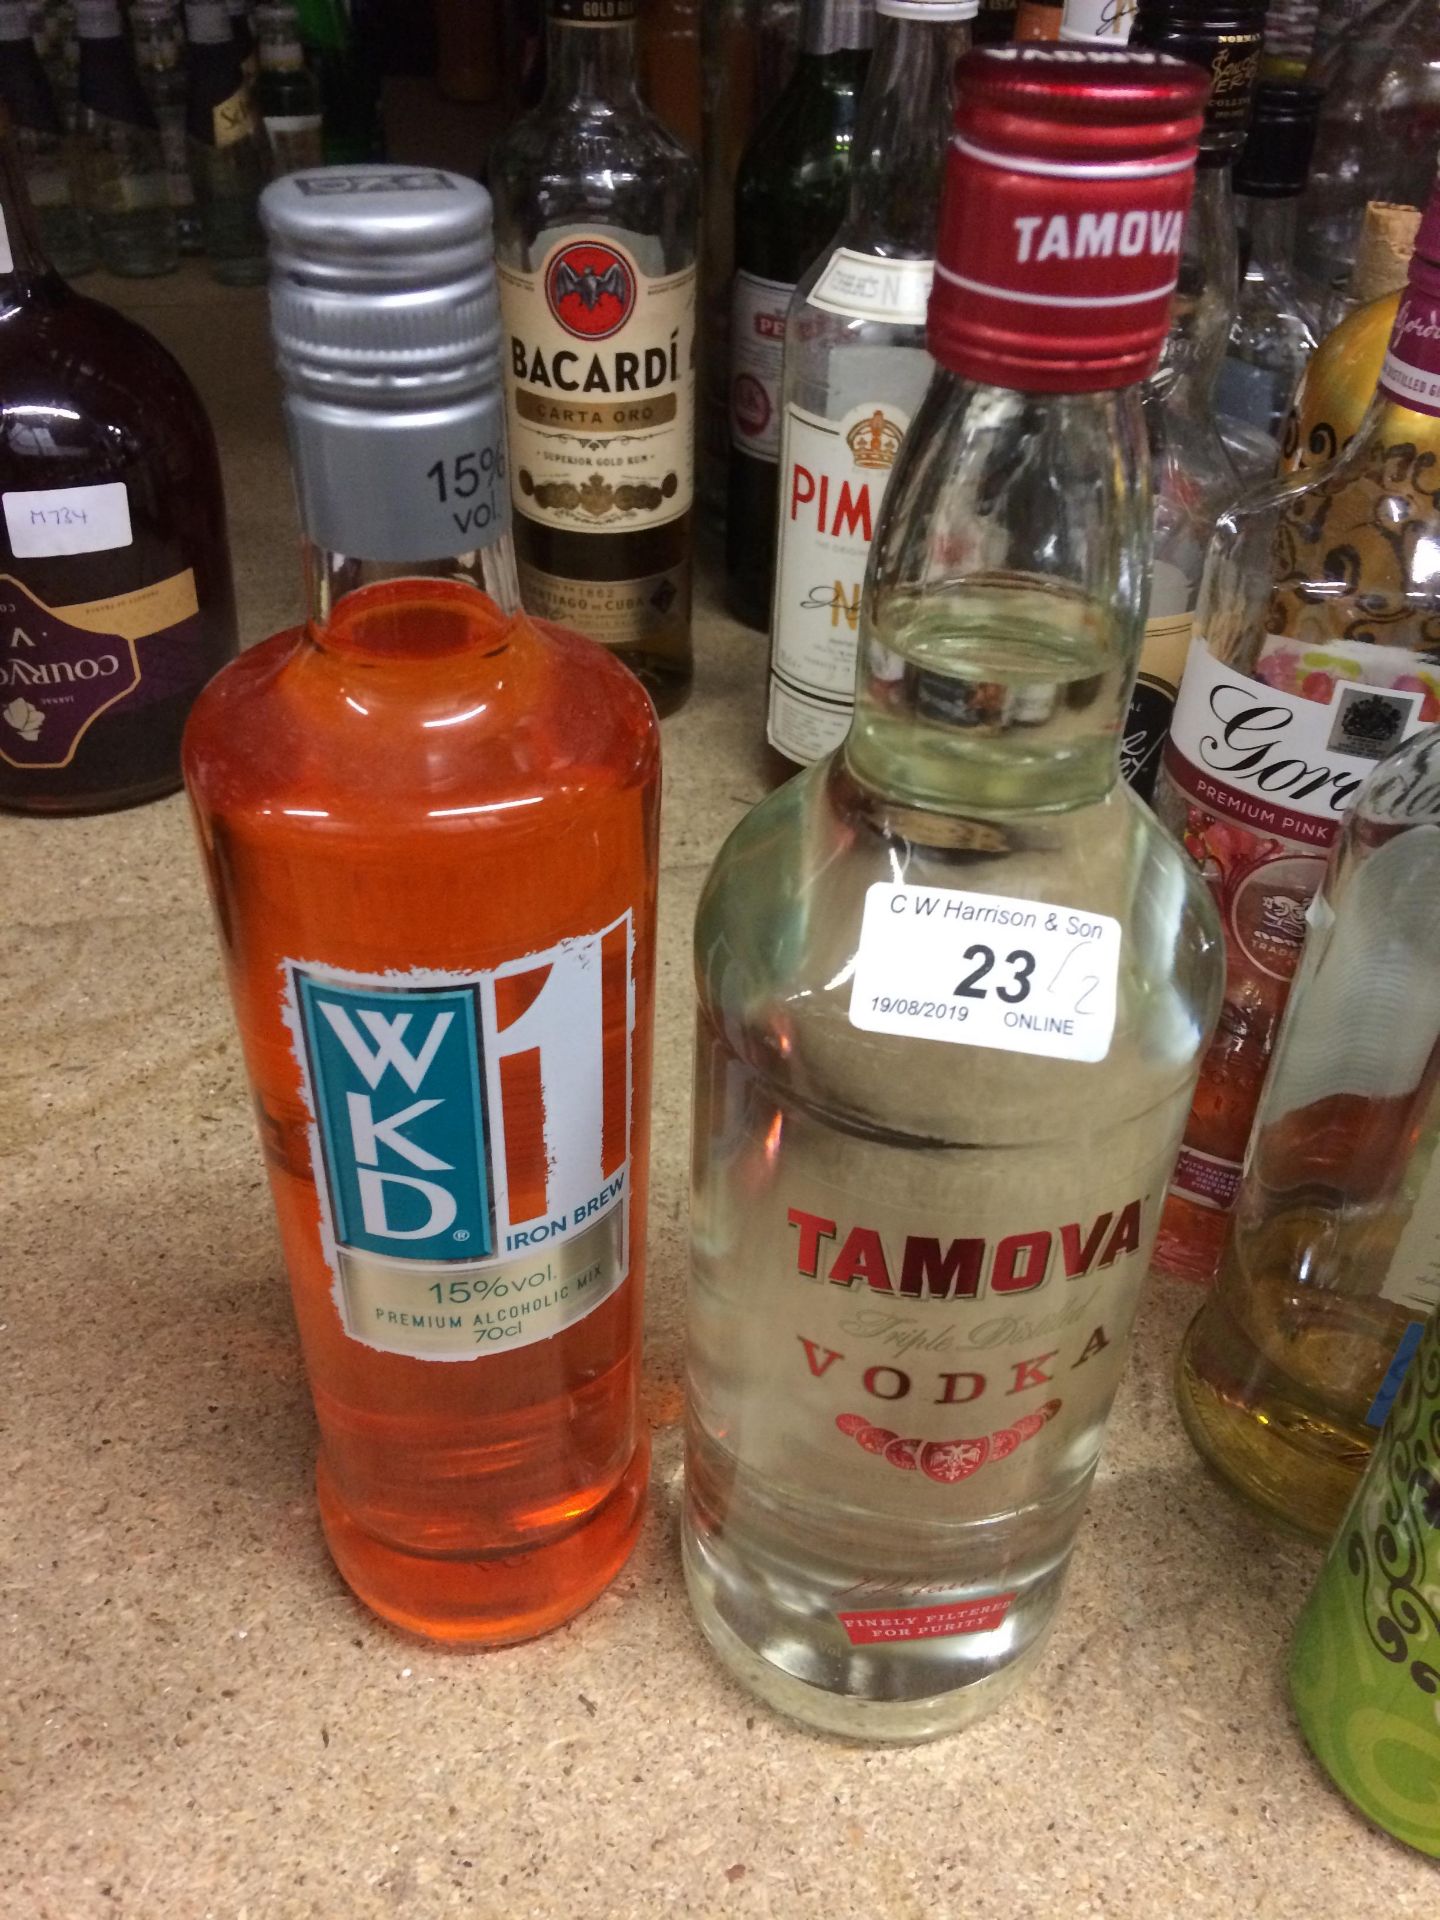 2 x items - 1litre bottle of Tamova vodka and a 70cl bottle of WKD Iron Brew alcoholic mix